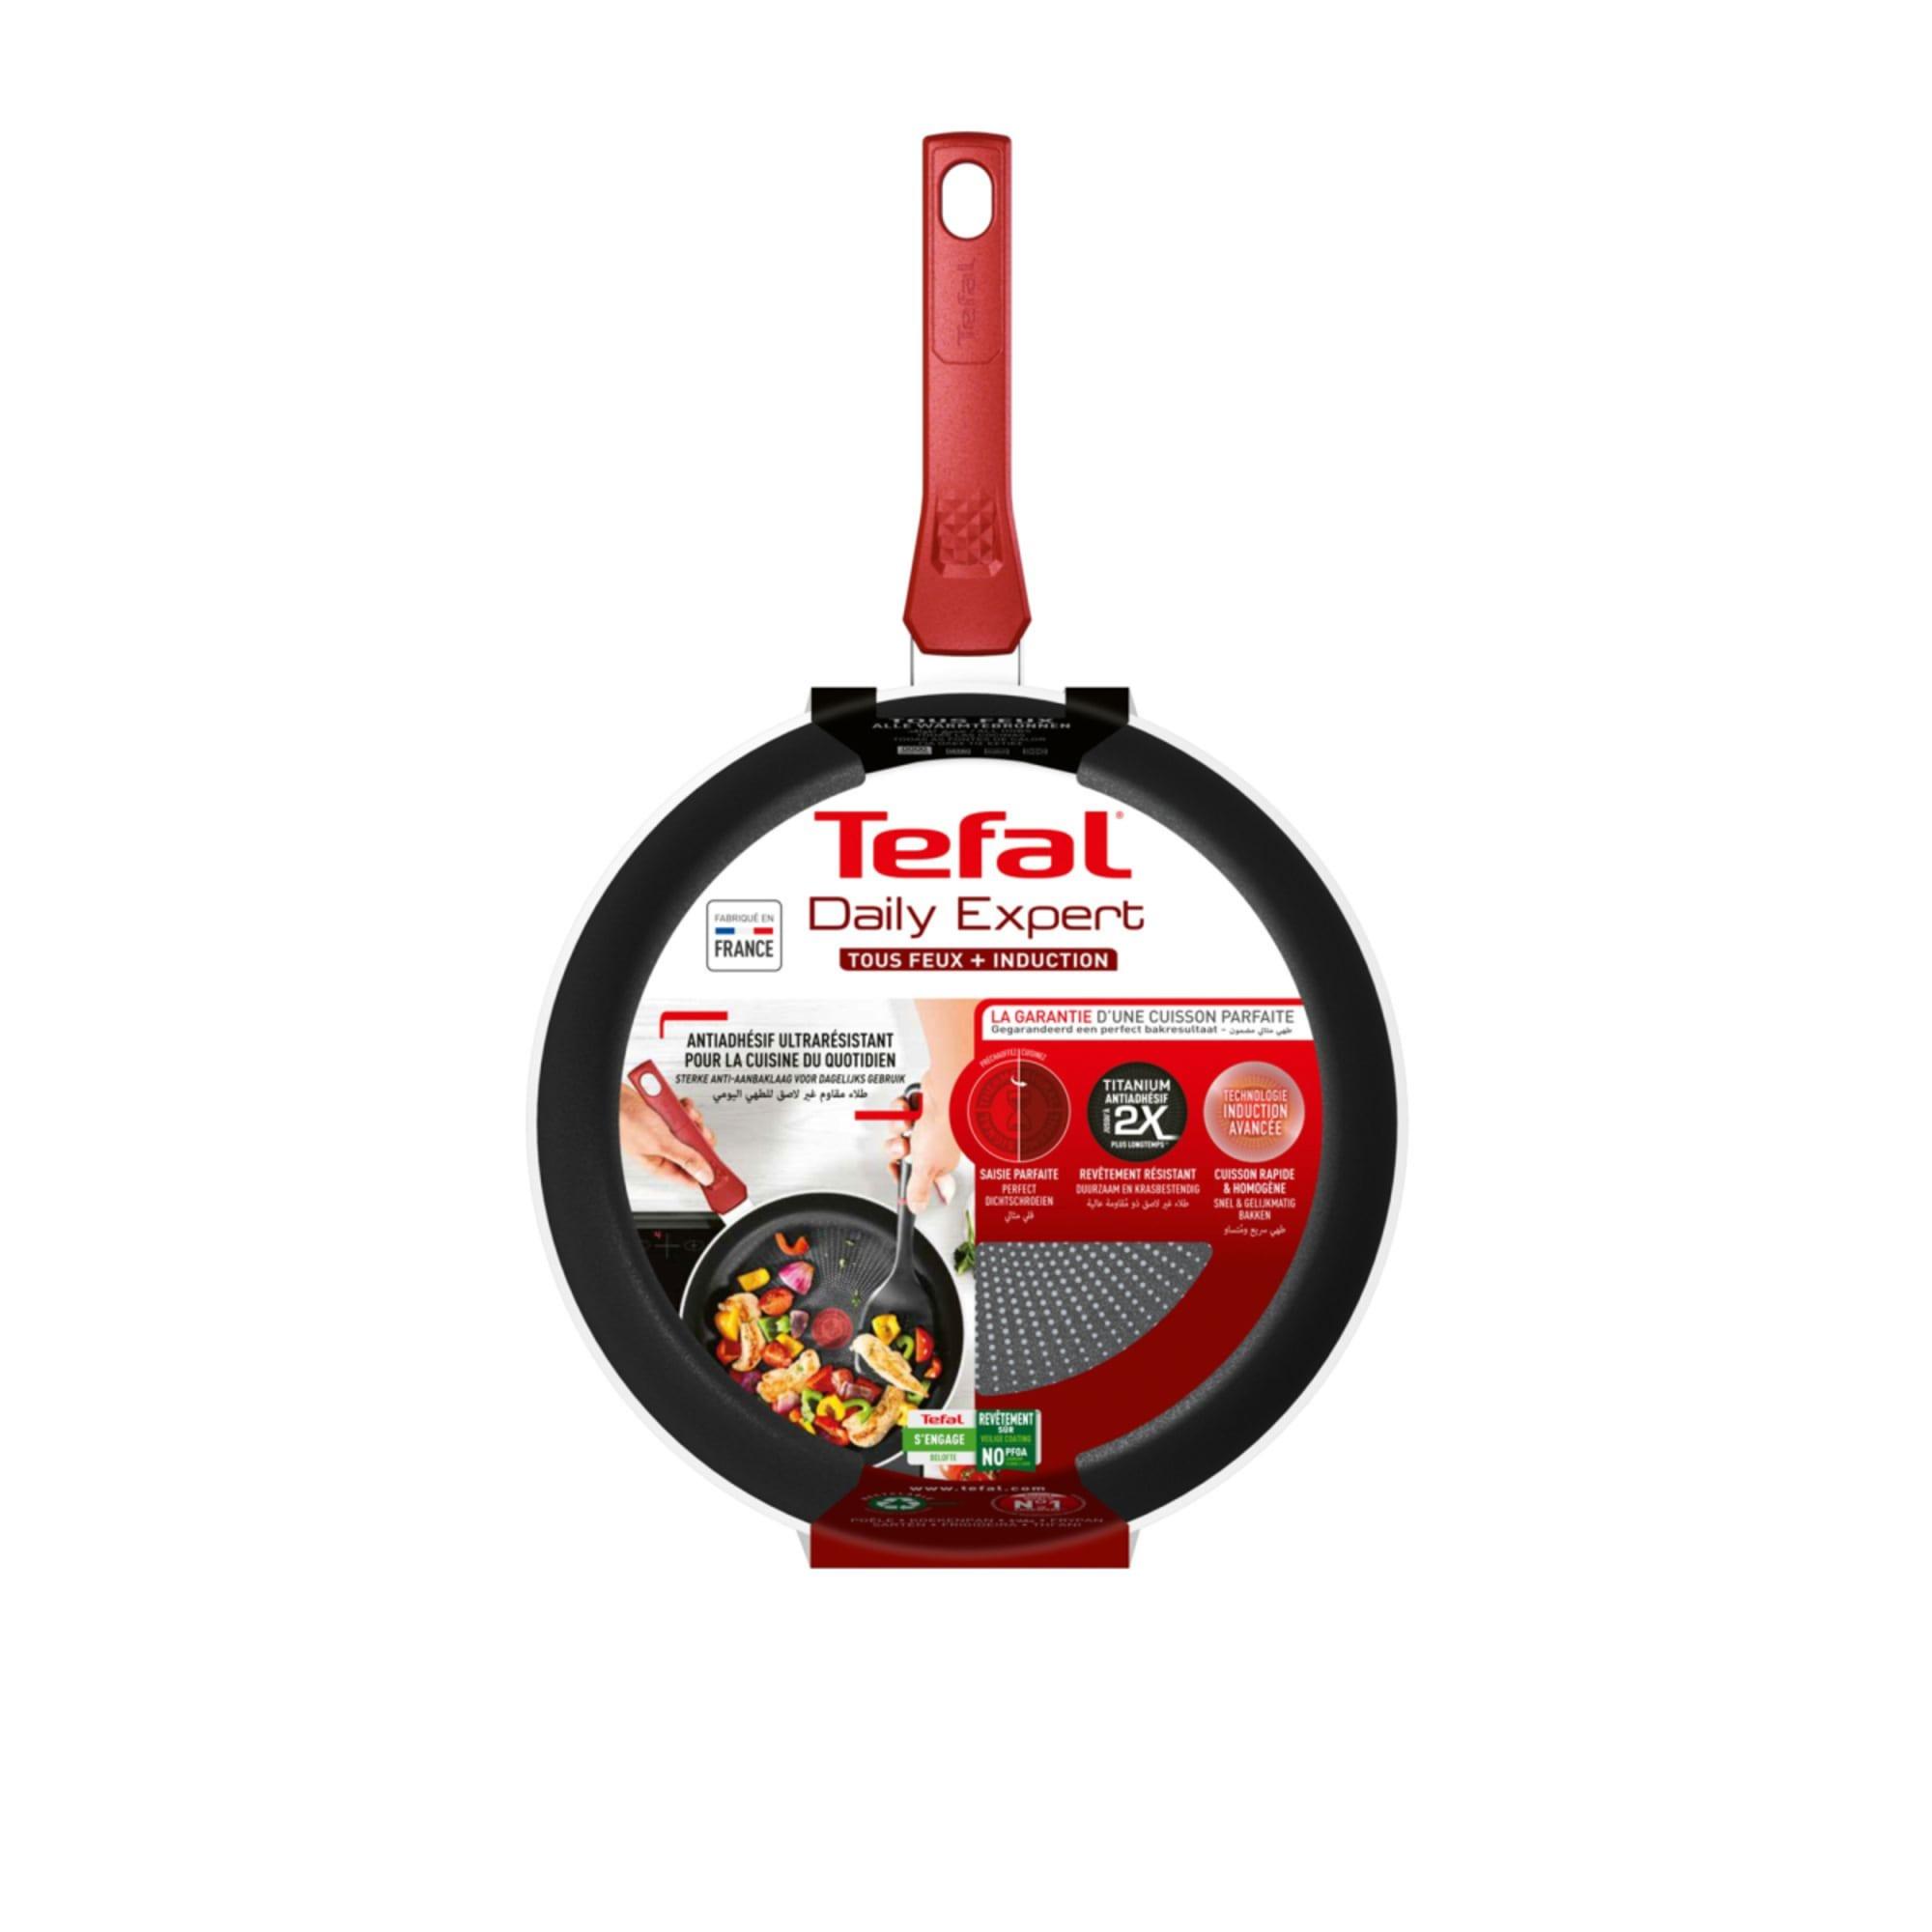 Tefal Daily Expert Frypan 24cm Red Image 4